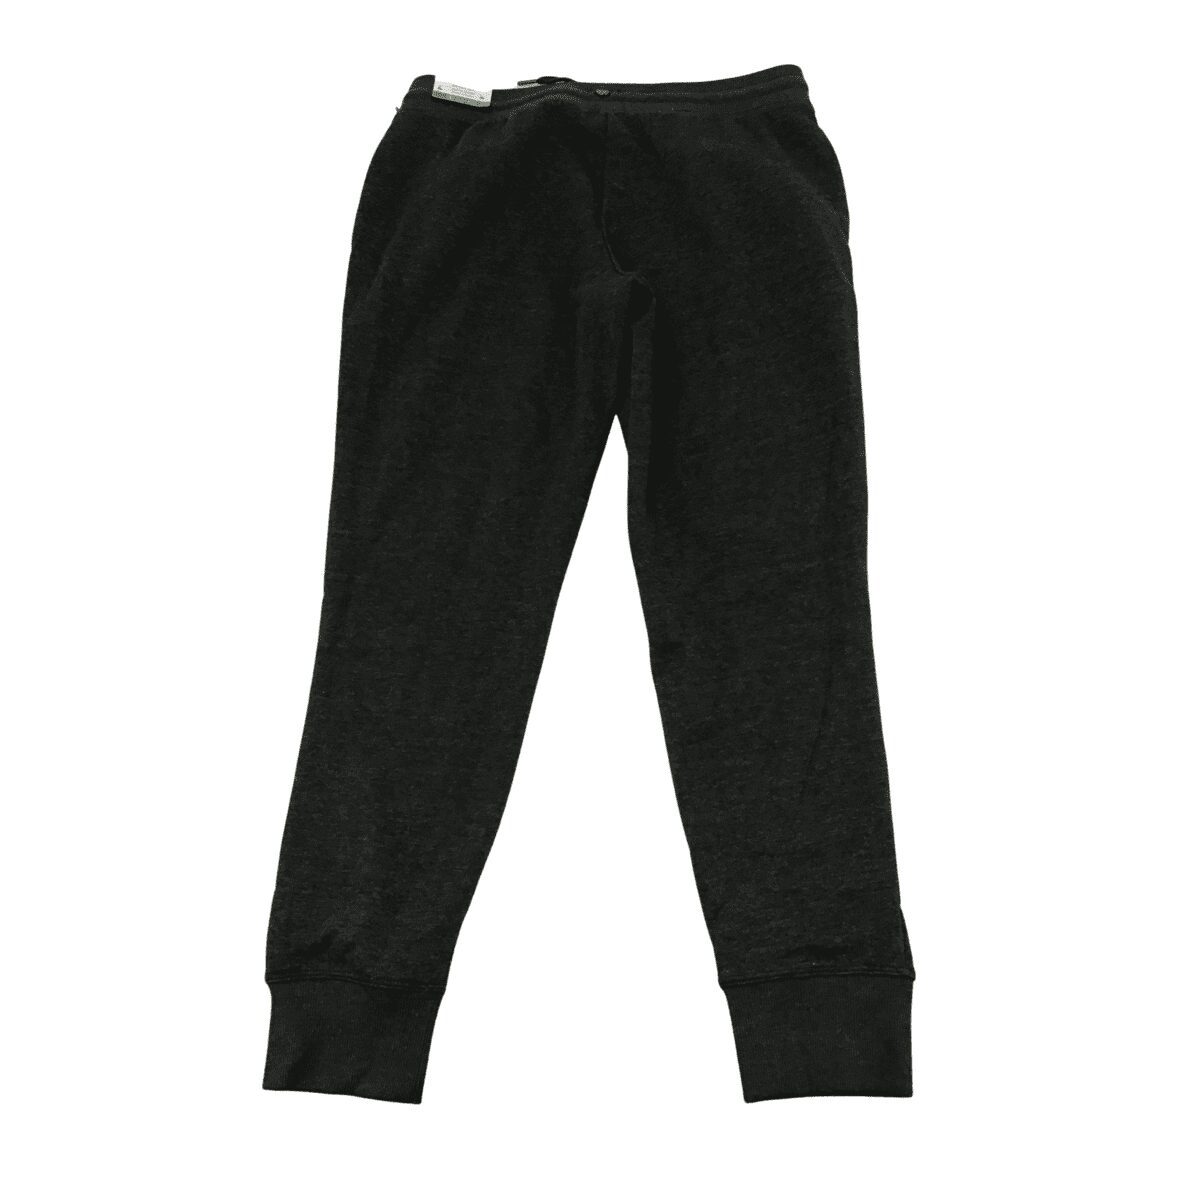 GAIAM Flat Front Athletic Pants for Women